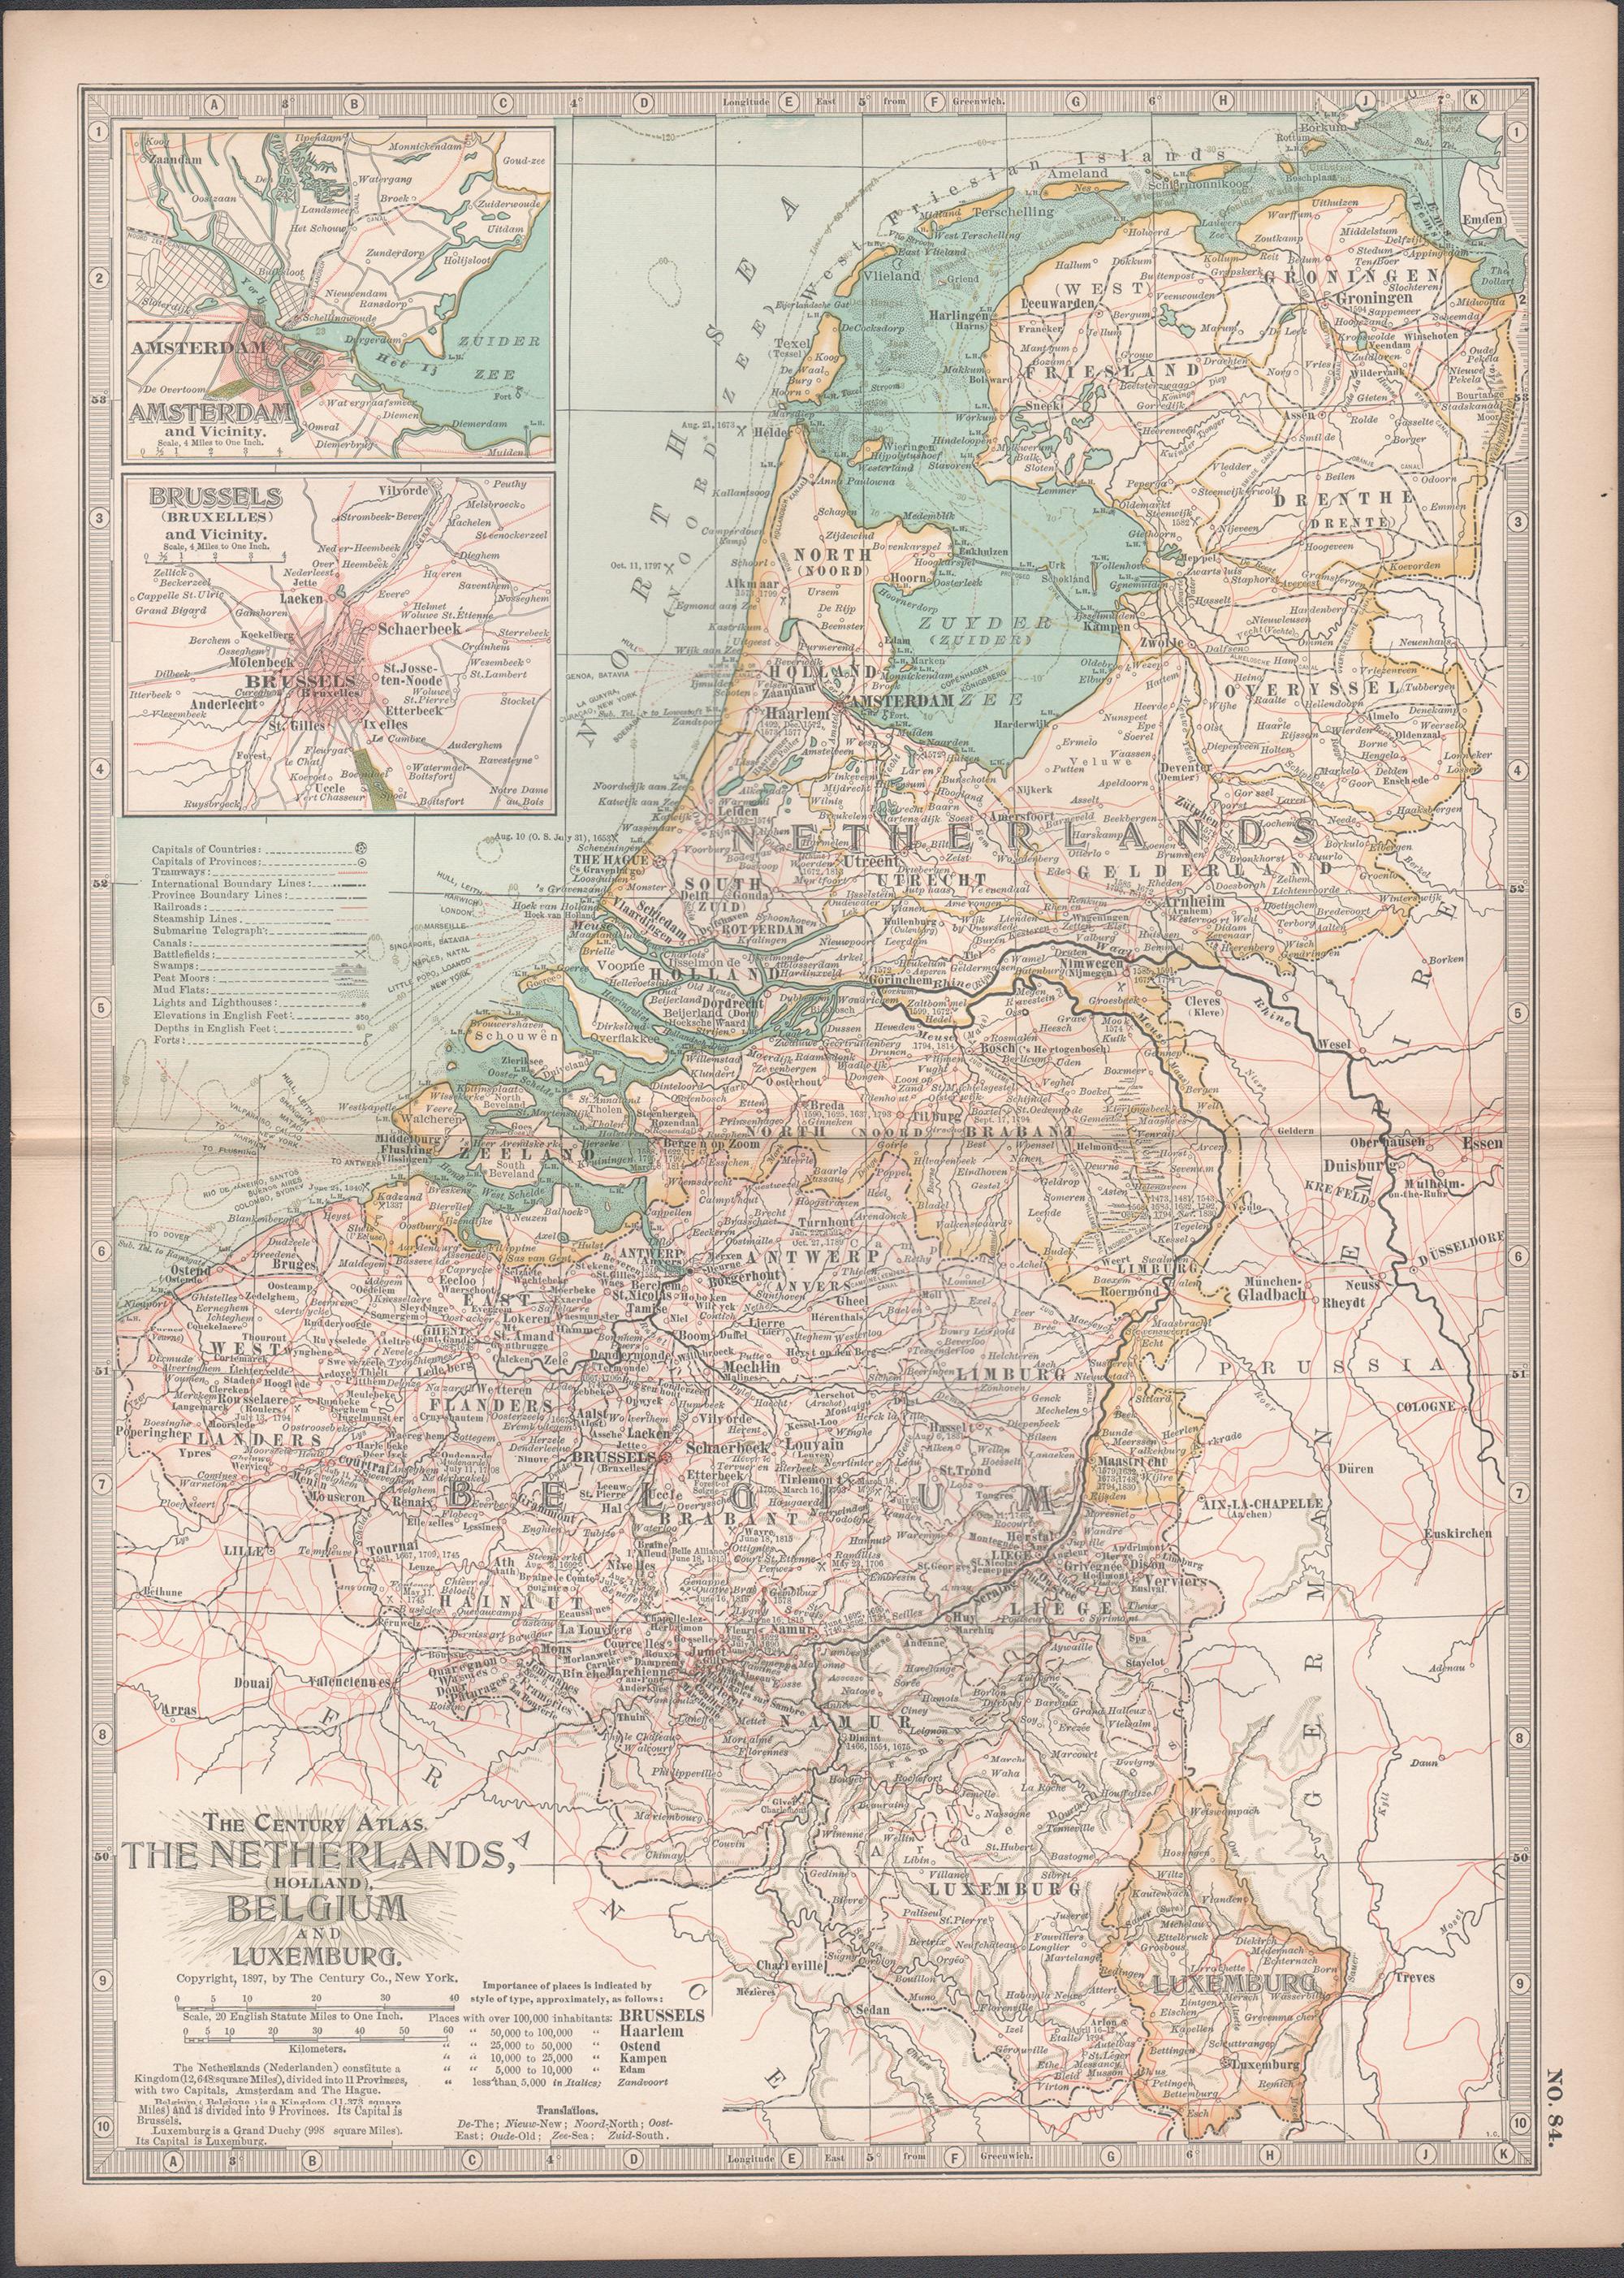 The Netherlands (Holland), Belgium and Luxemburg. Century Atlas antique map - Print by Unknown